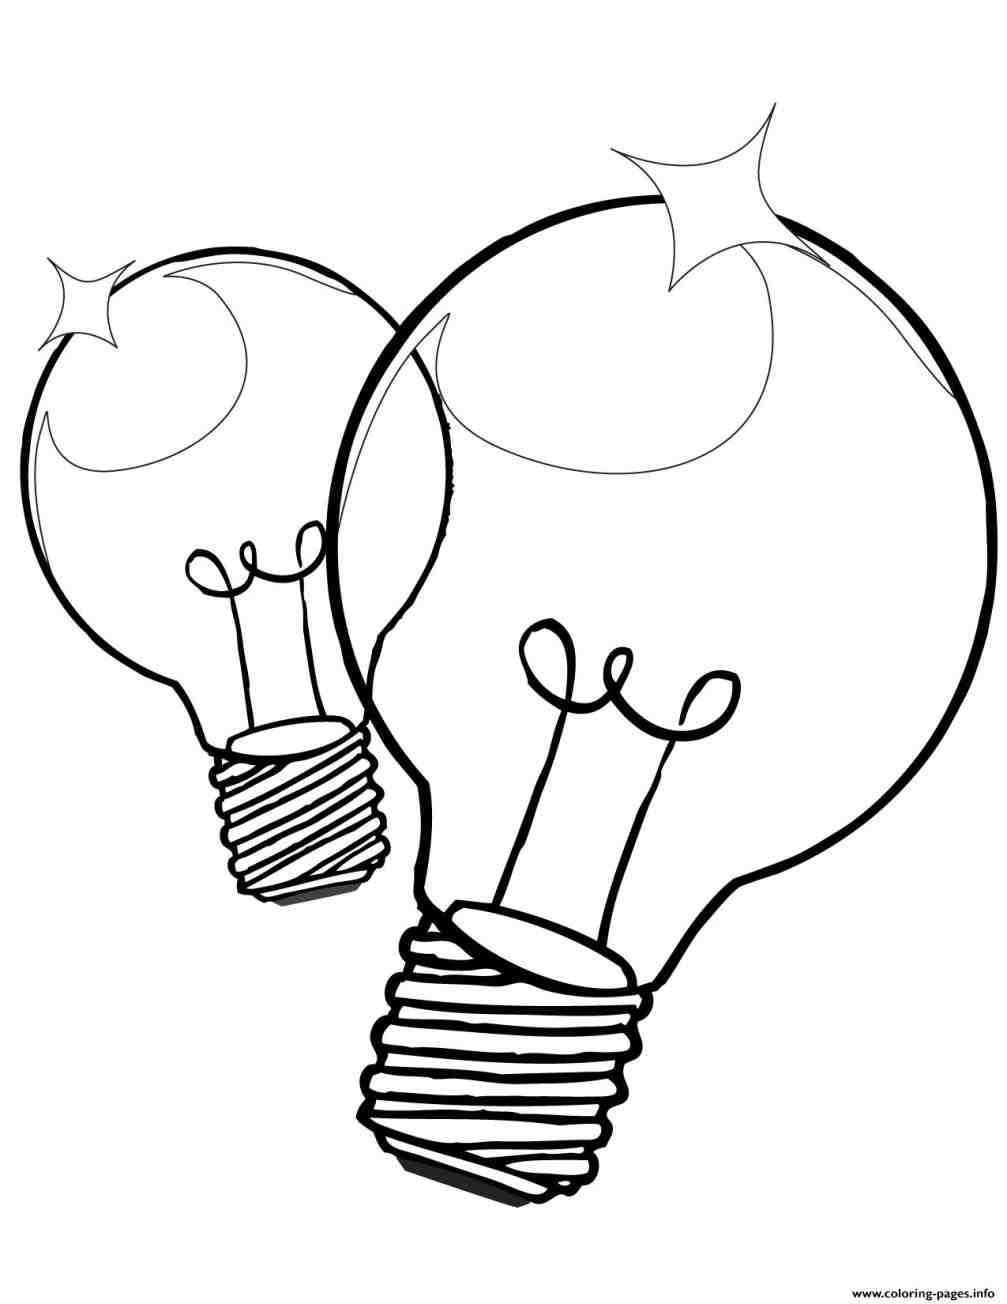 Christmas Light Bulb Coloring Page | Free download on ...